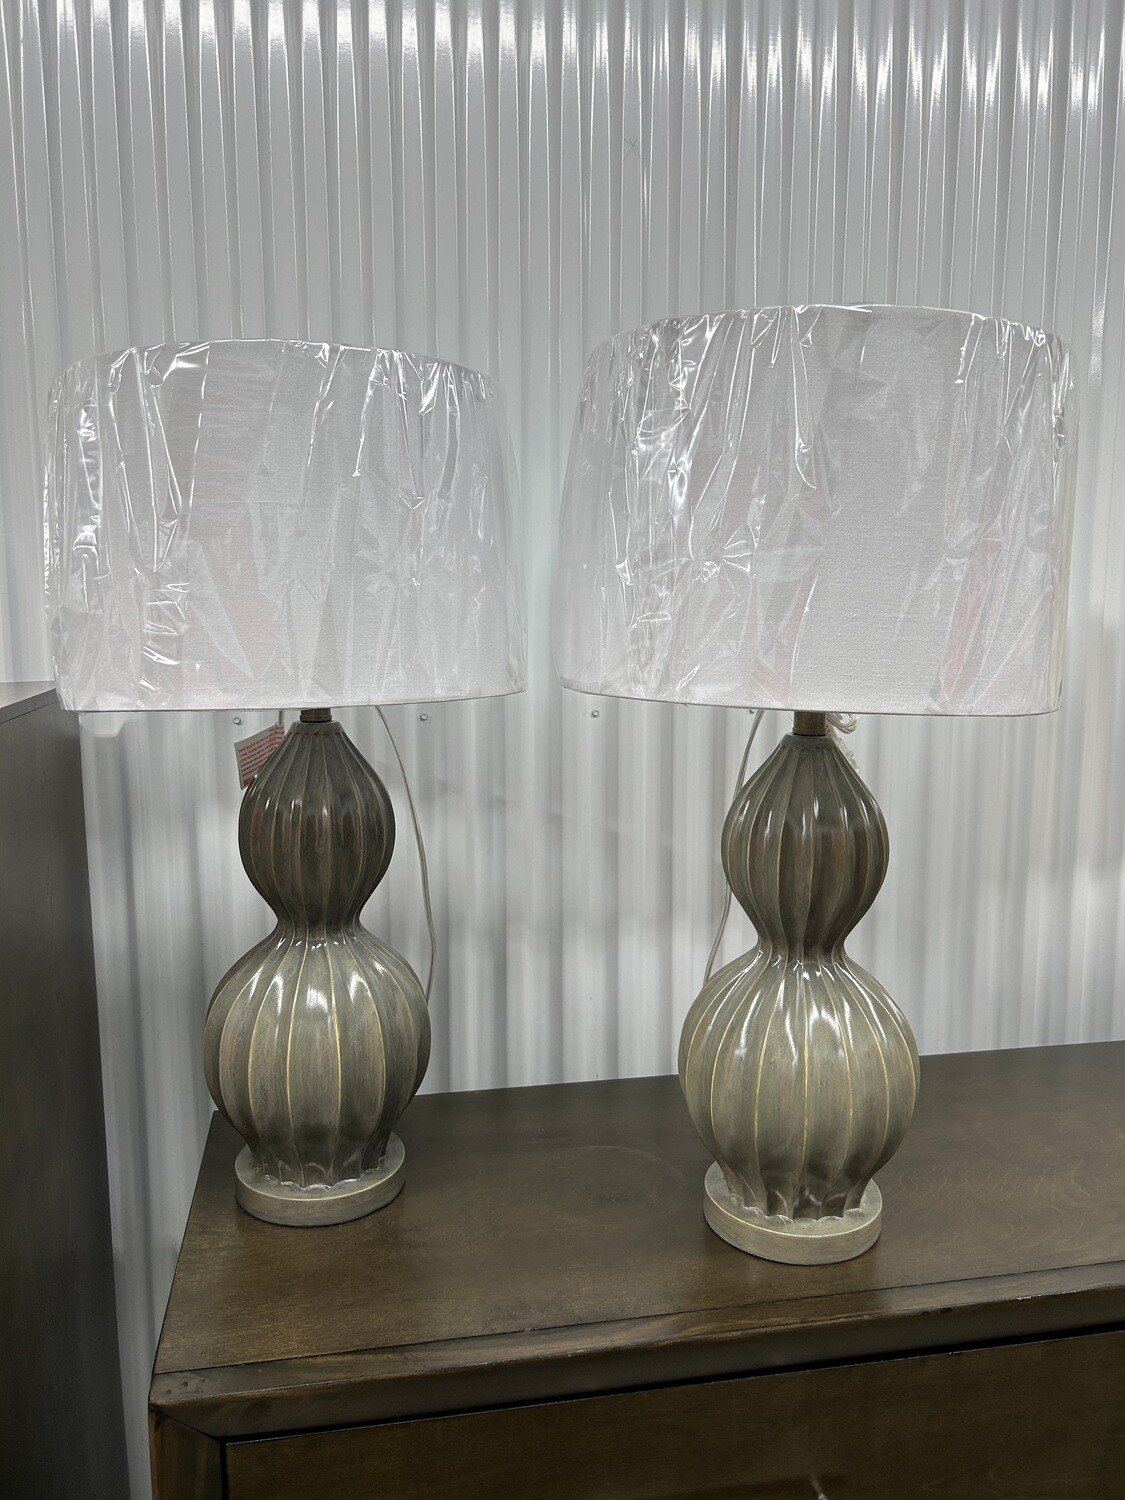 Like new! Table Lamp, Ribbed Gourd Gray-Green, white shade #2322 - 3 mos. to sell @ 50% off